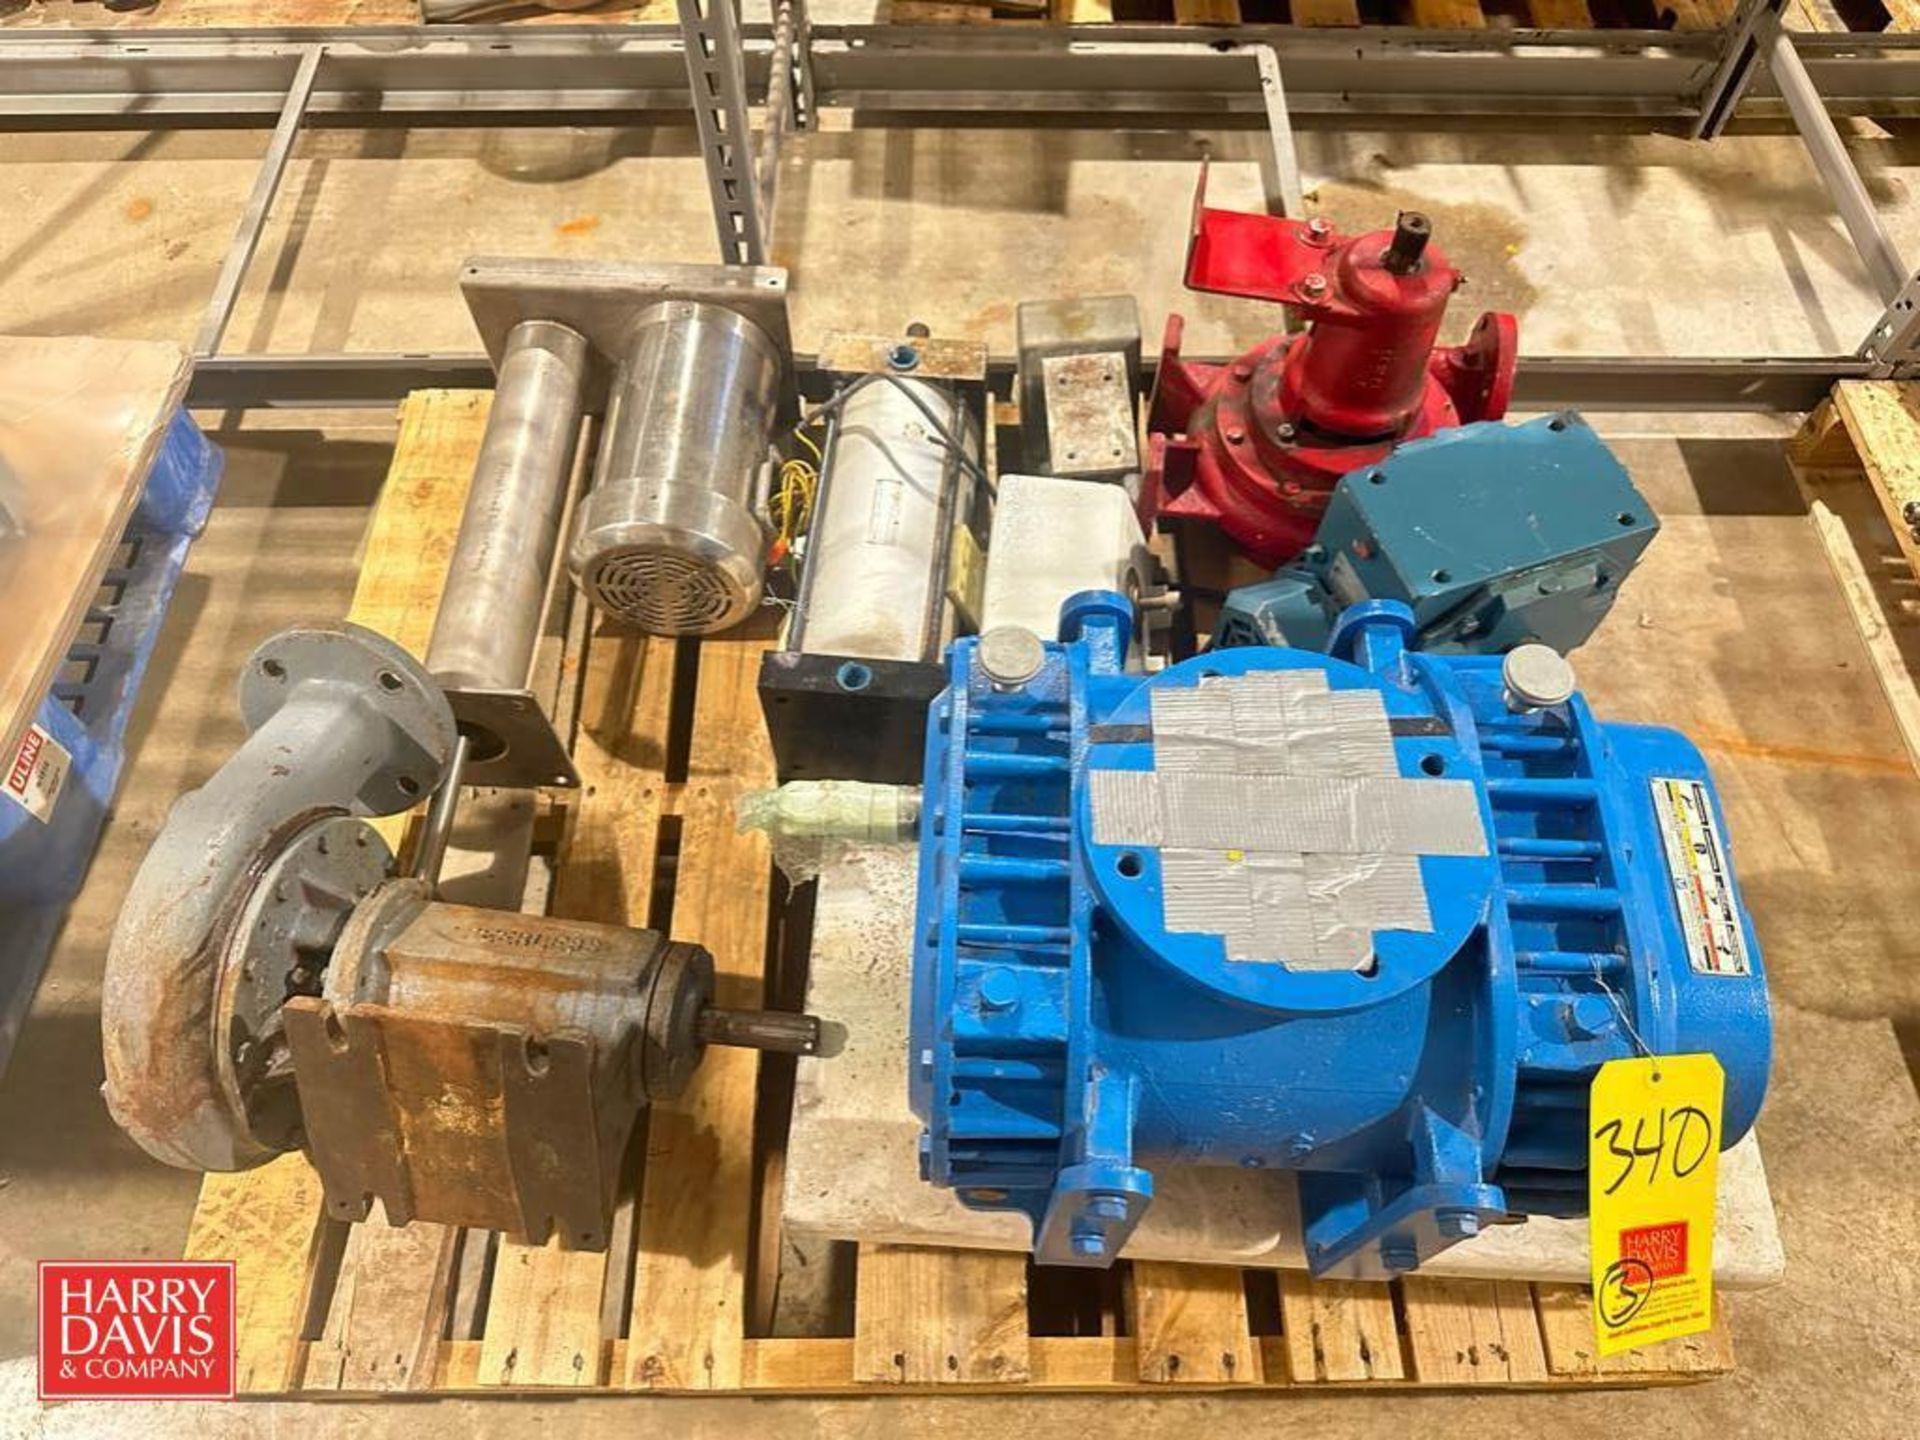 Tuthill Vacuum Blower, Model: 4609-46LZ Gear Reducing Drives, Electric Gate Valve, Air Actuator and - Image 2 of 4